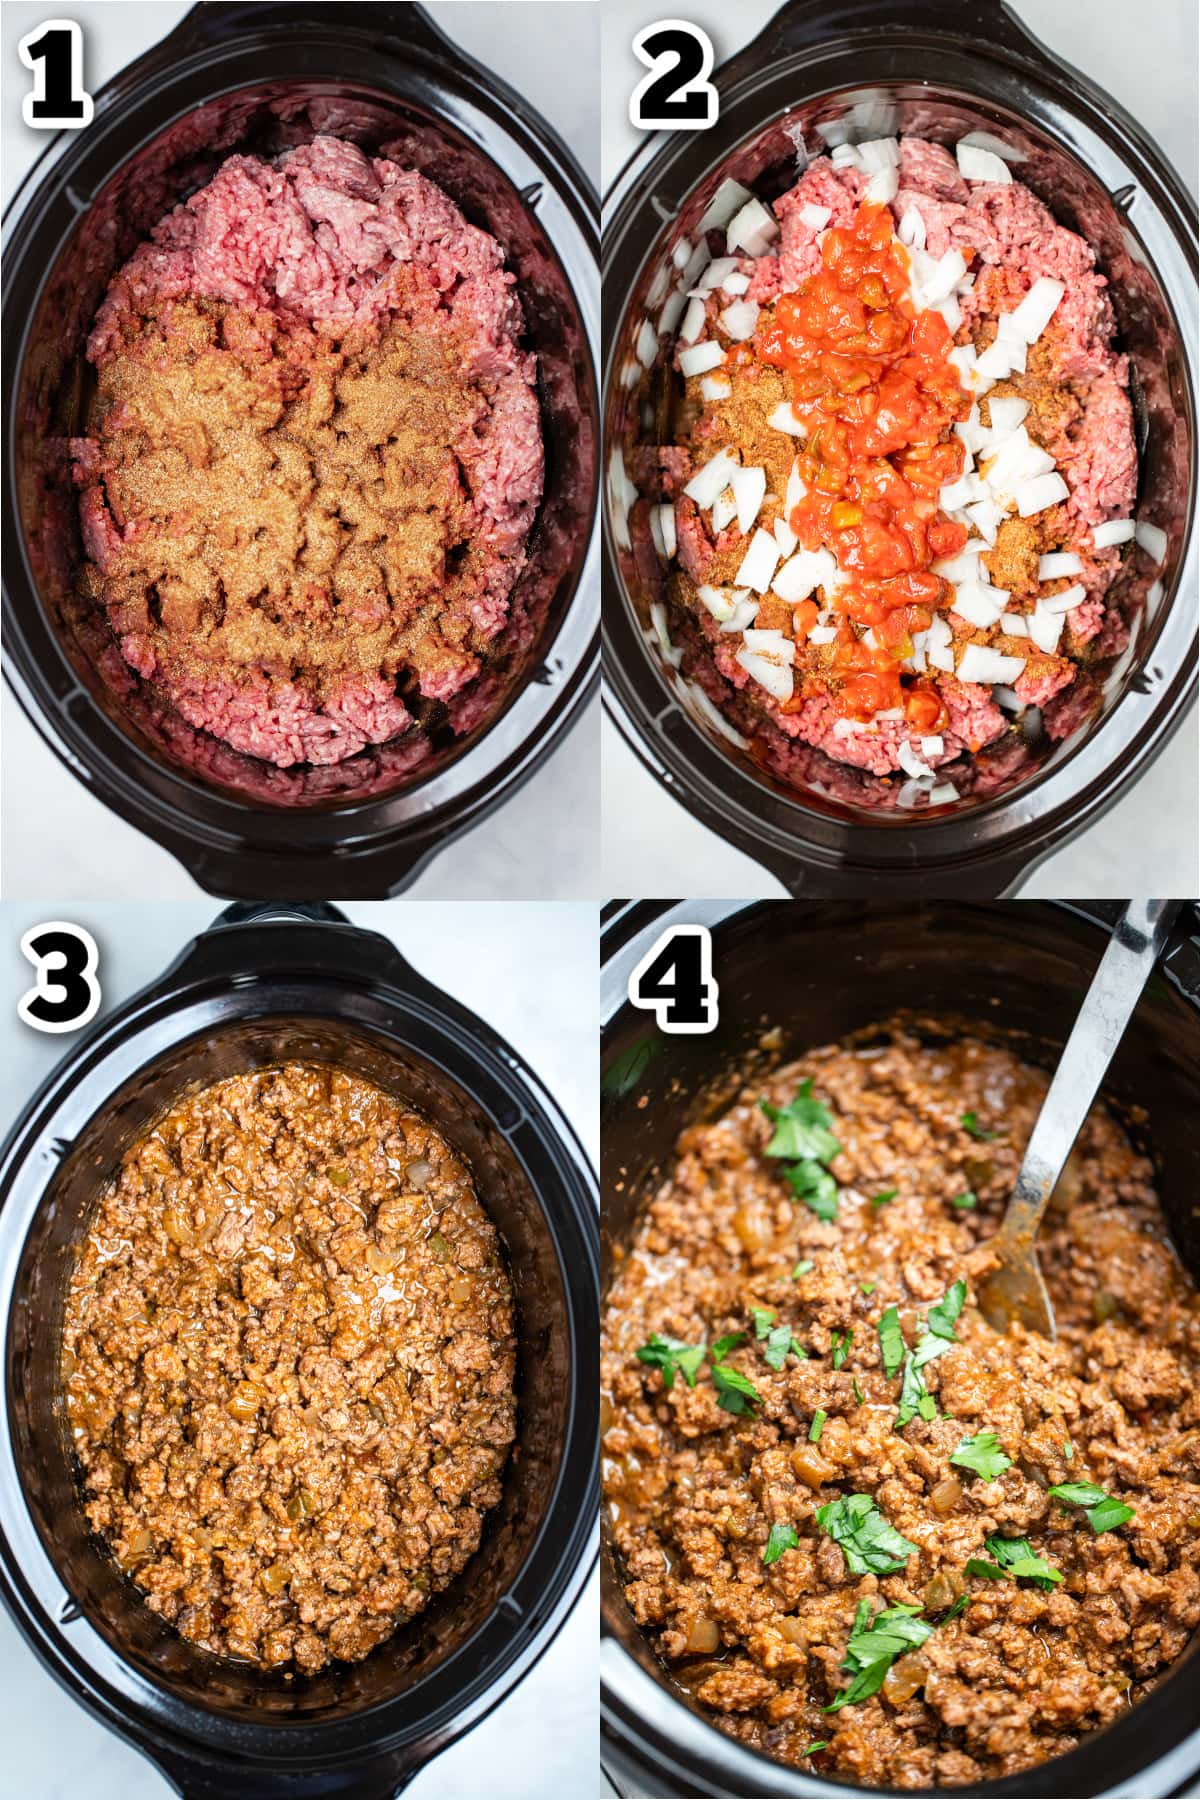 Step by step photos for how to make slow cooker taco meat.